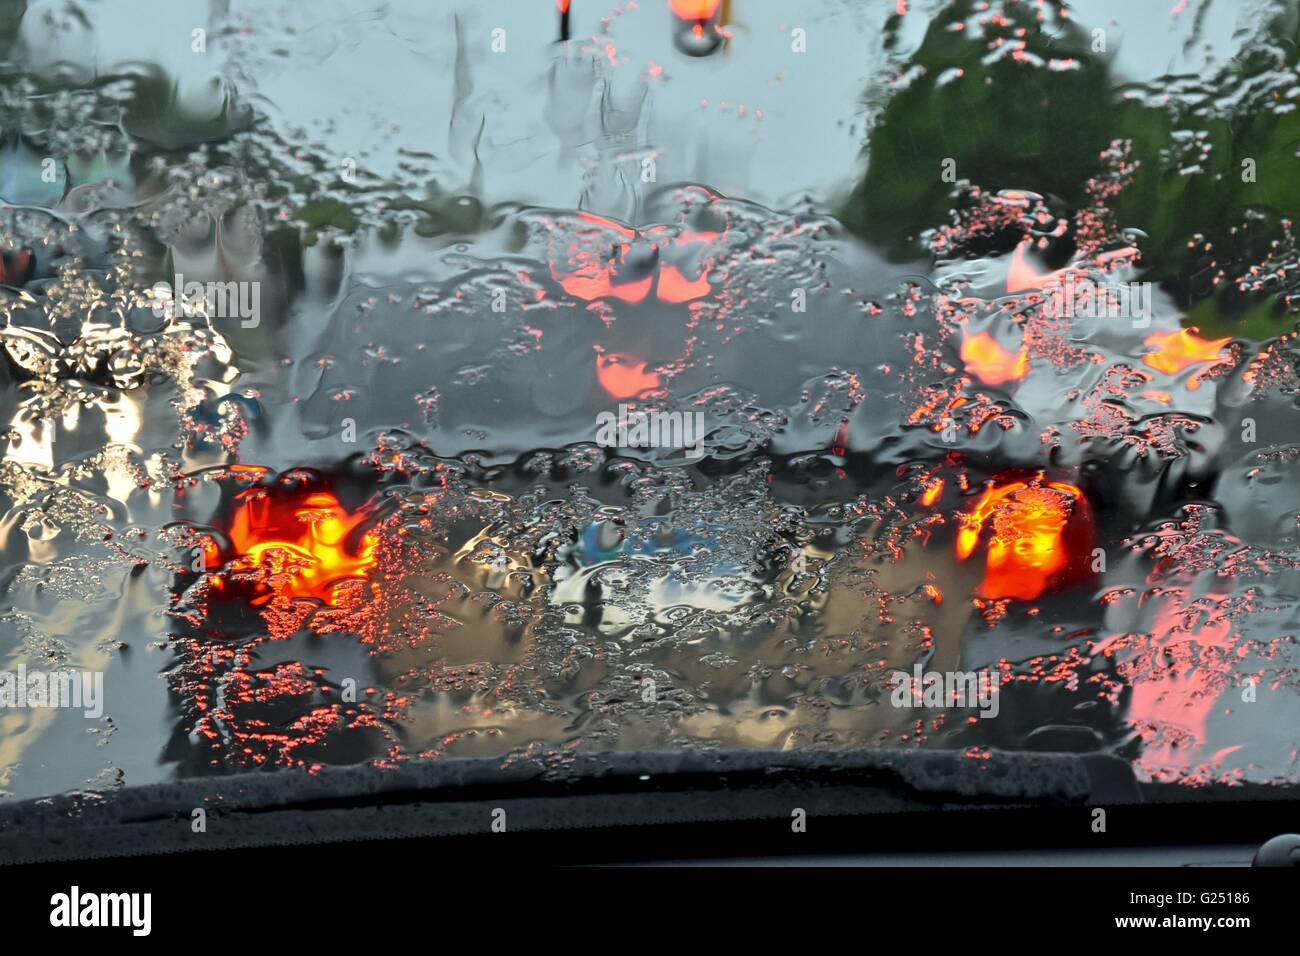 Driving a car during a rainy day, causing unsafe driving conditions Stock Photo